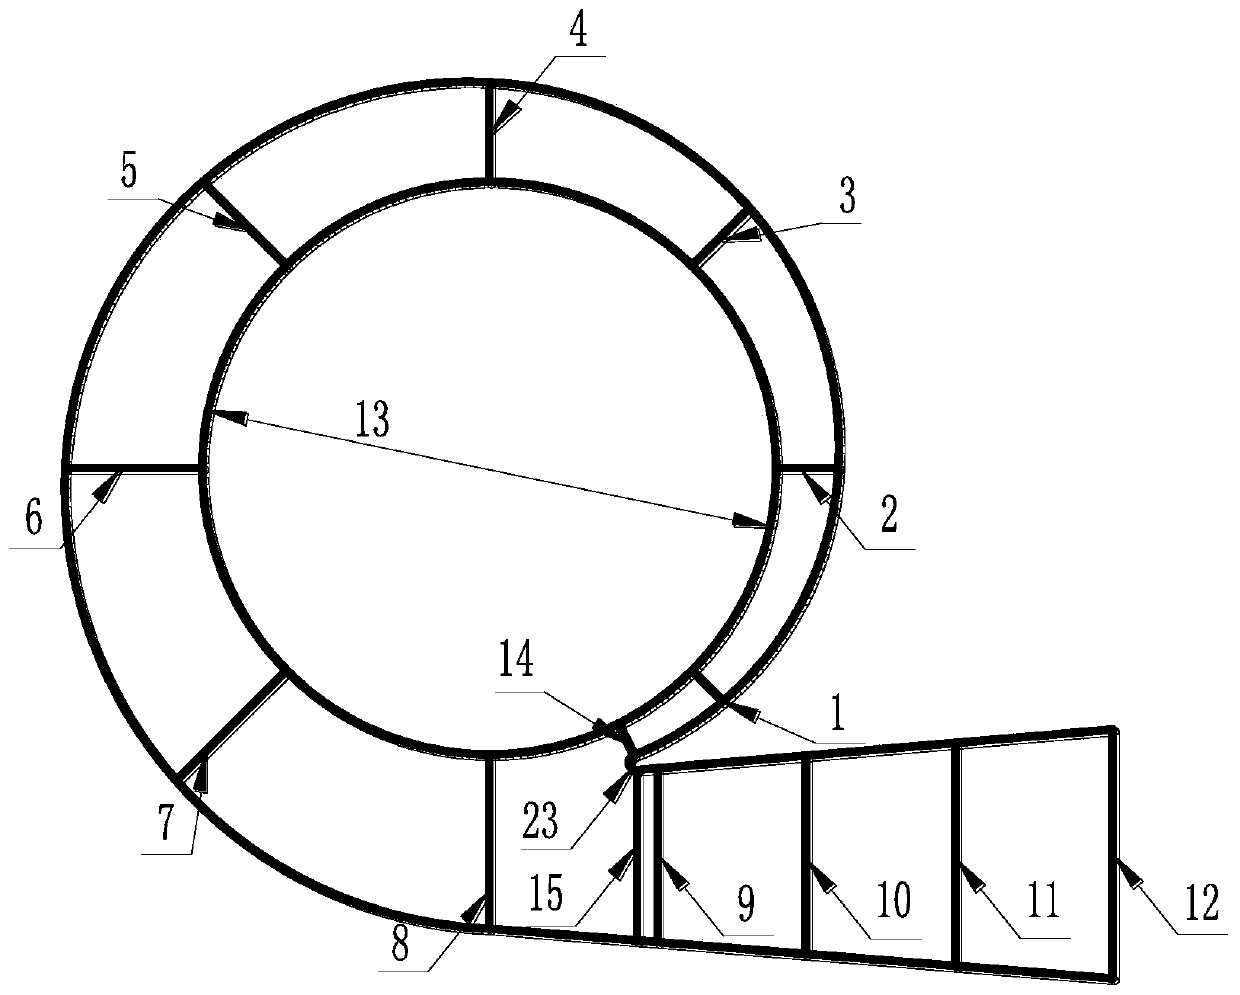 A smooth modeling method for a centrifugal pump volute